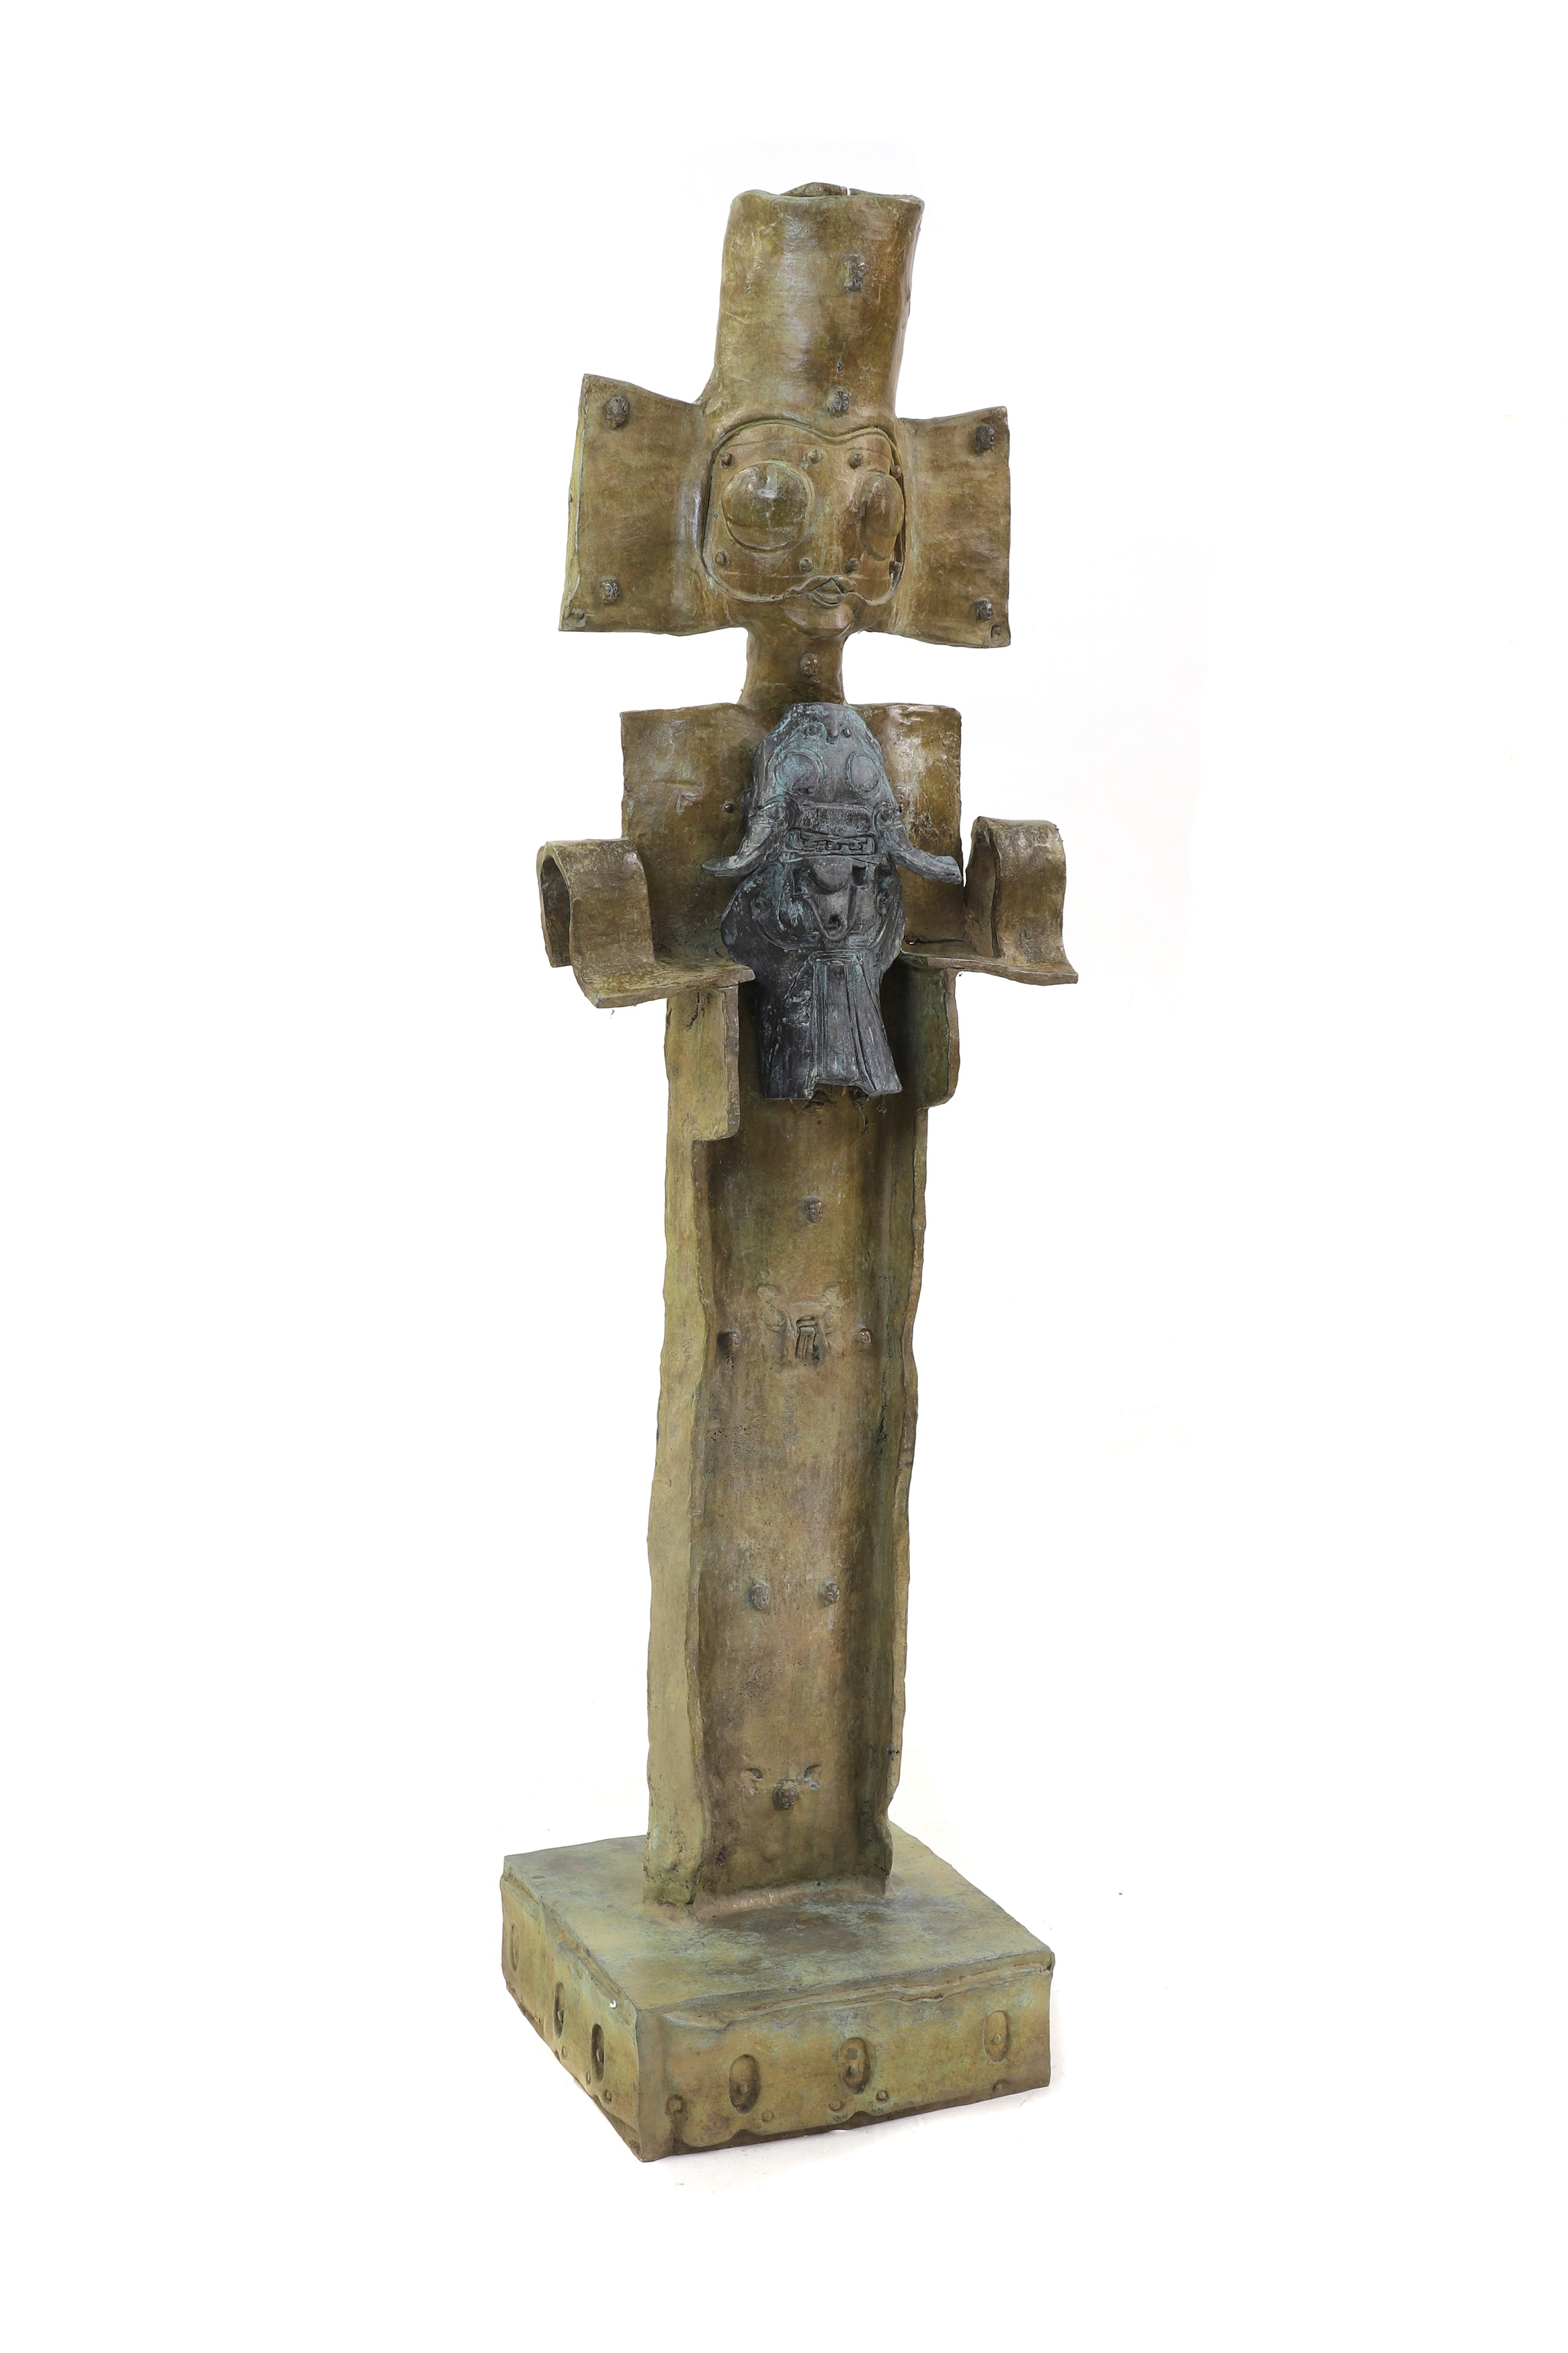 Roberto Matta (Chilean-Italian, 1911-2002) 'Mater Nostrum' bronze, signed with artist's motif, inscribed with title and 'cera persa' (lost wax) and numbered '7/8', also with foundry stamp 'Fondera Art Fili Bonvicini Somma Campangna, Italia' 'Archivio S 93/10' on base 150cm high overall (£6,000-8,000)